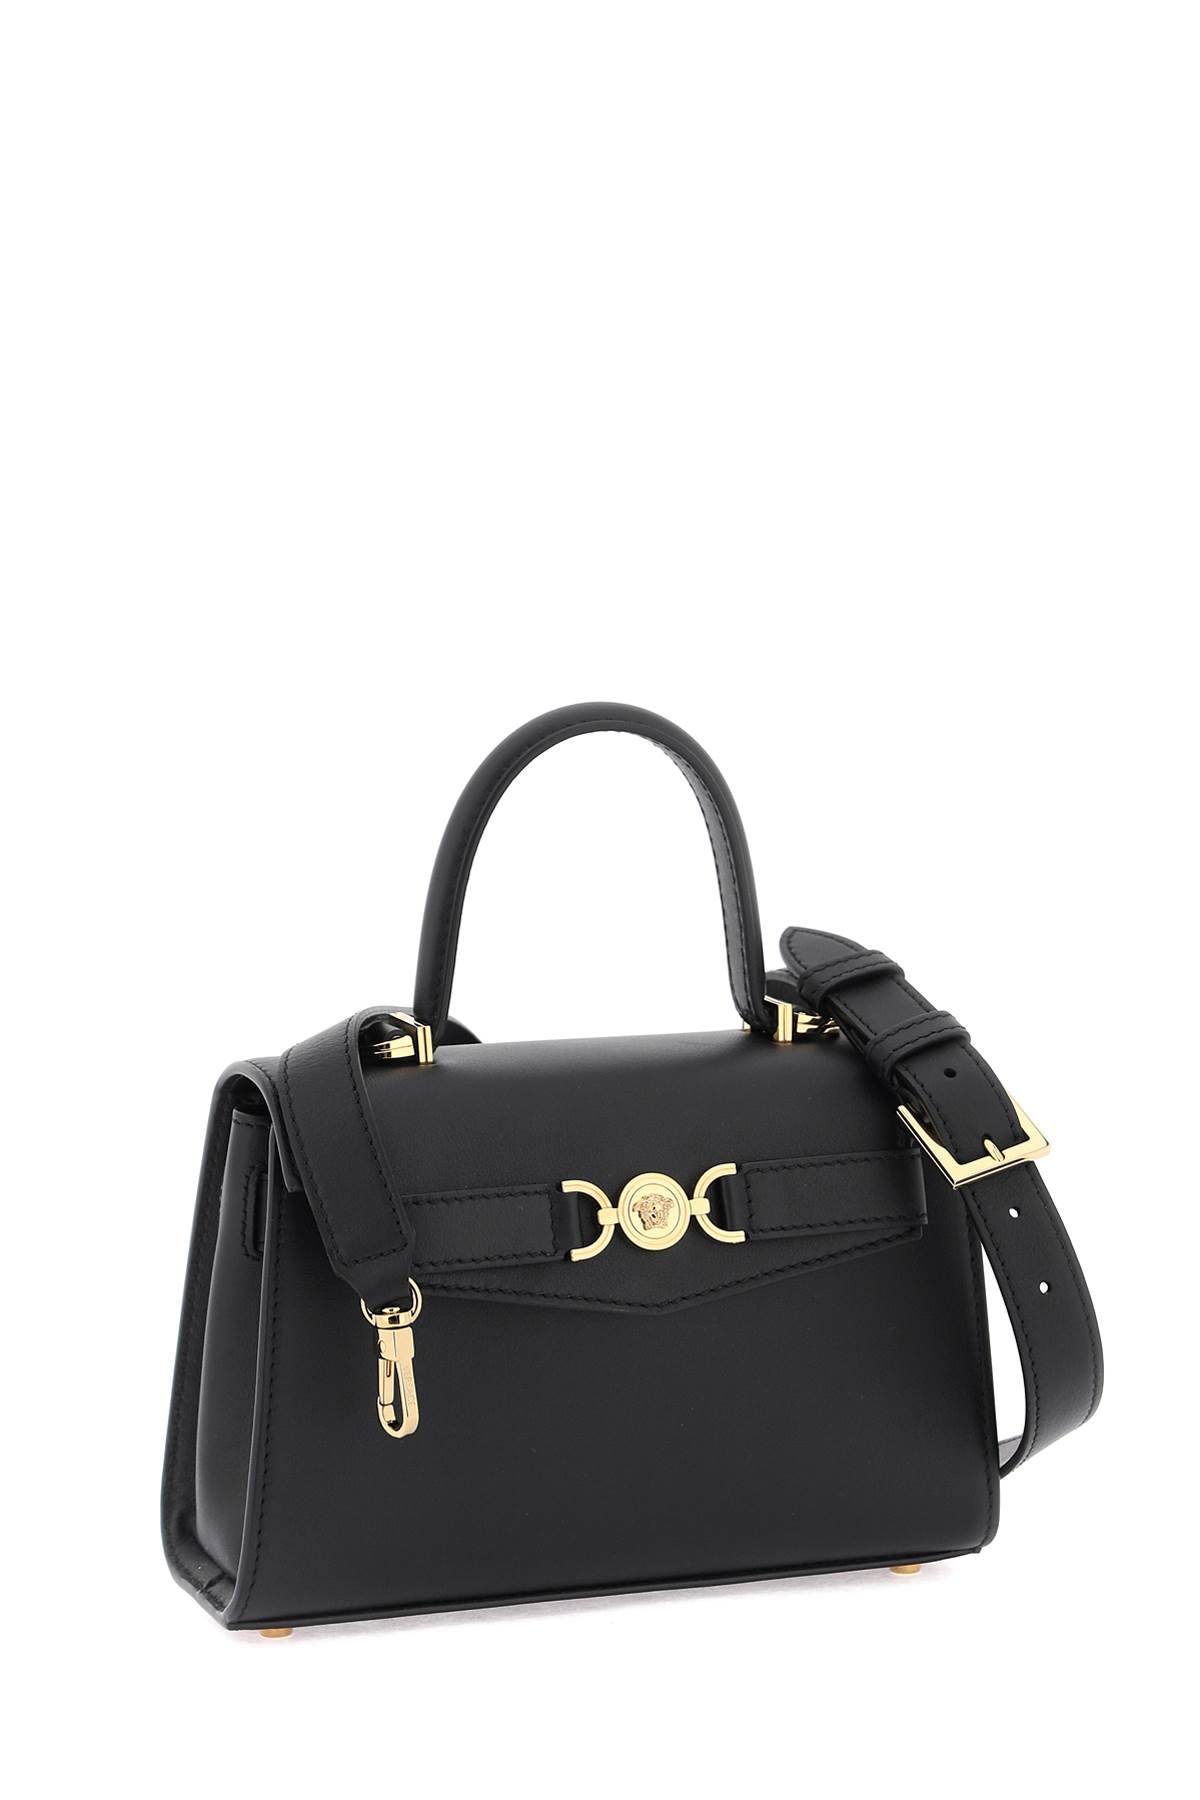 VERSACE Small Medusa '95 Calfskin Leather Handbag with Gold-Tone Accents